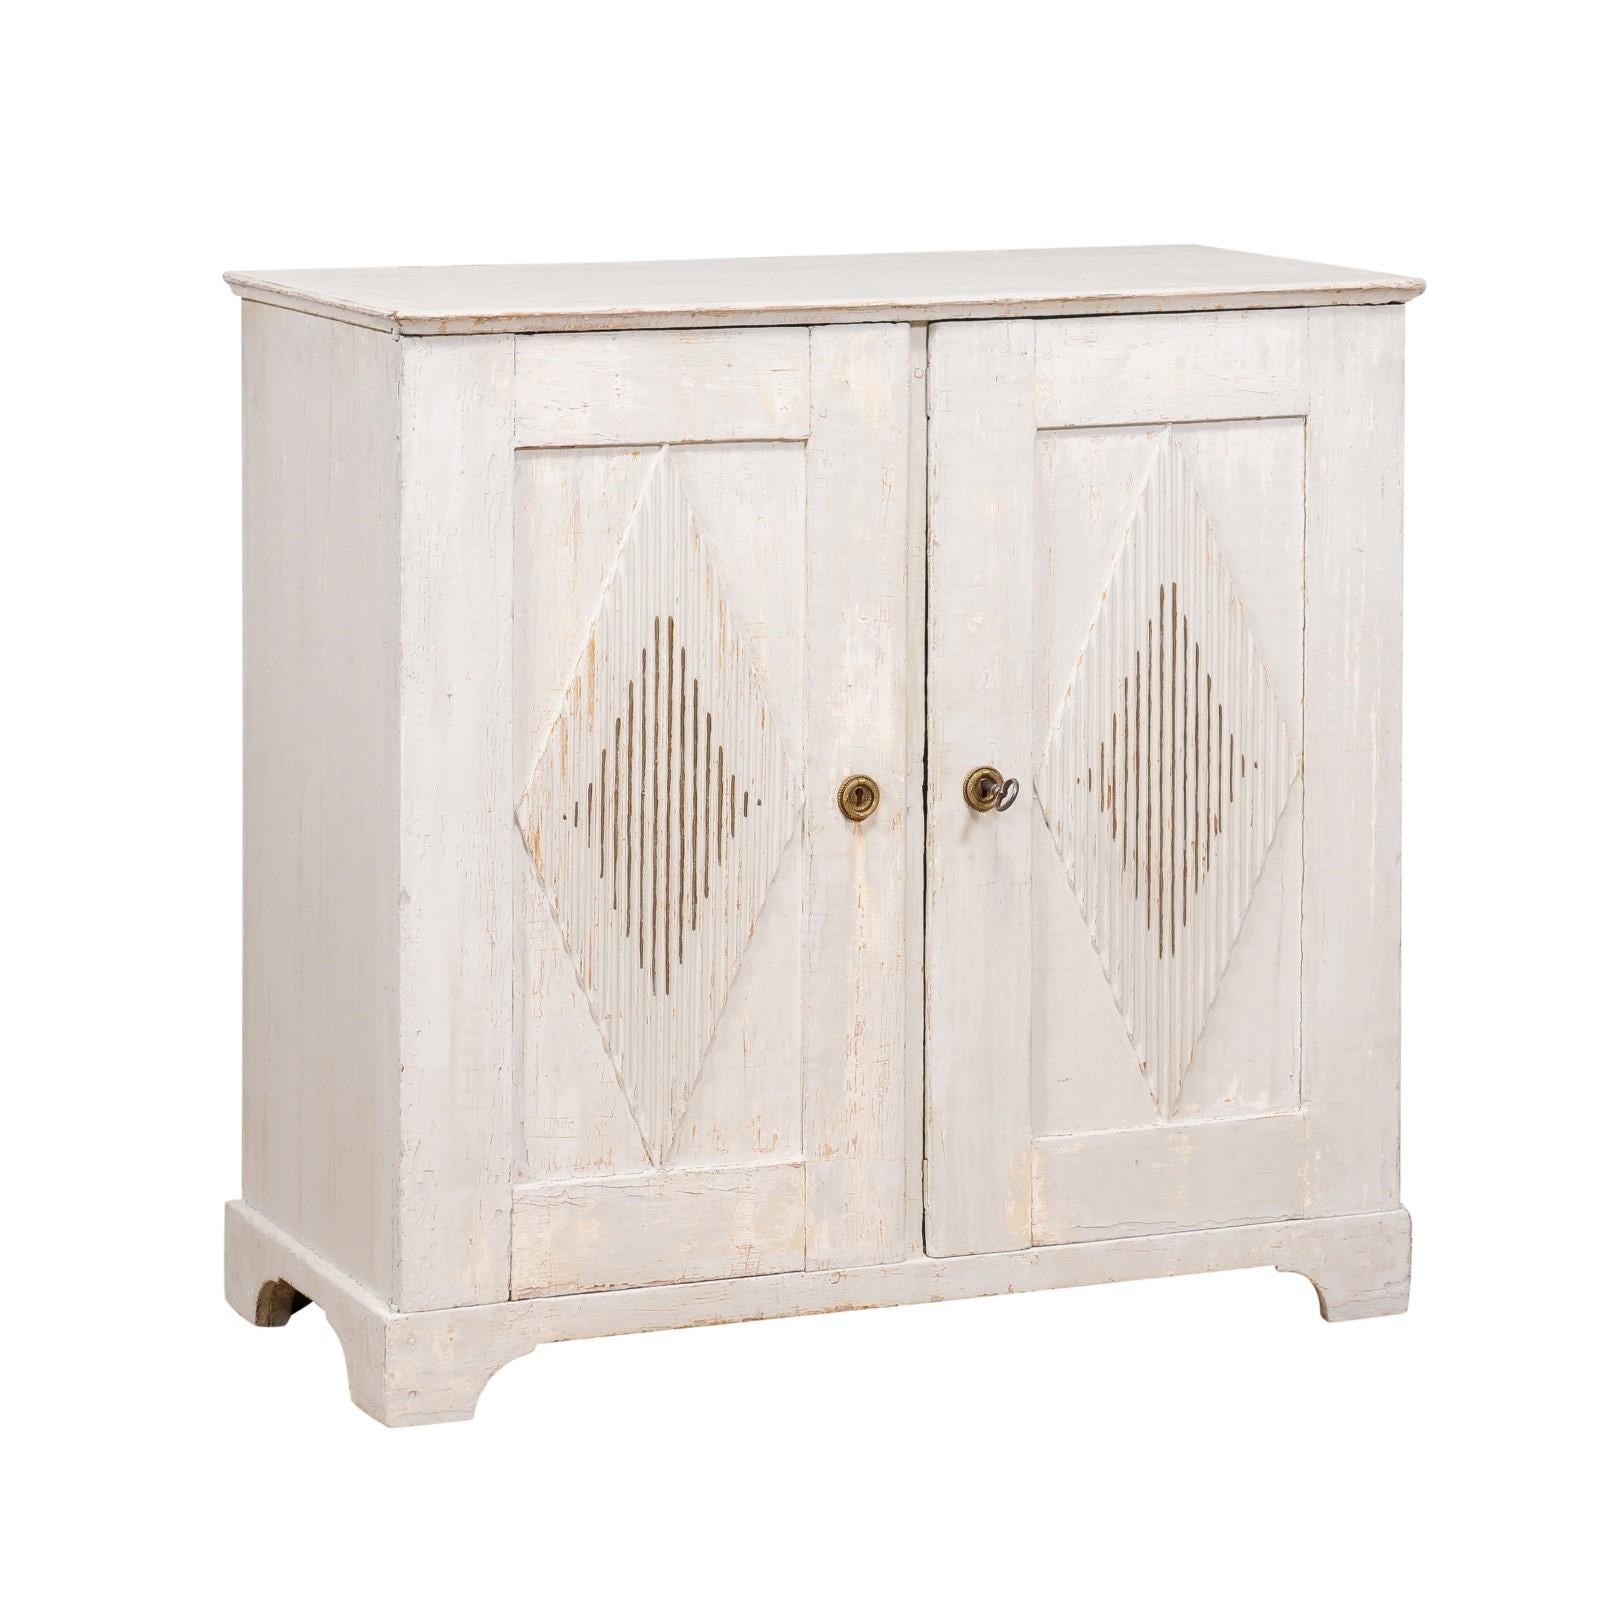 A Swedish Gustavian period sideboard from circa 1810 with gray painted finish, carved diamond motifs, two doors and hidden drawers. This Swedish Gustavian period sideboard from around 1810 exudes timeless elegance. Its dove gray painted finish, with